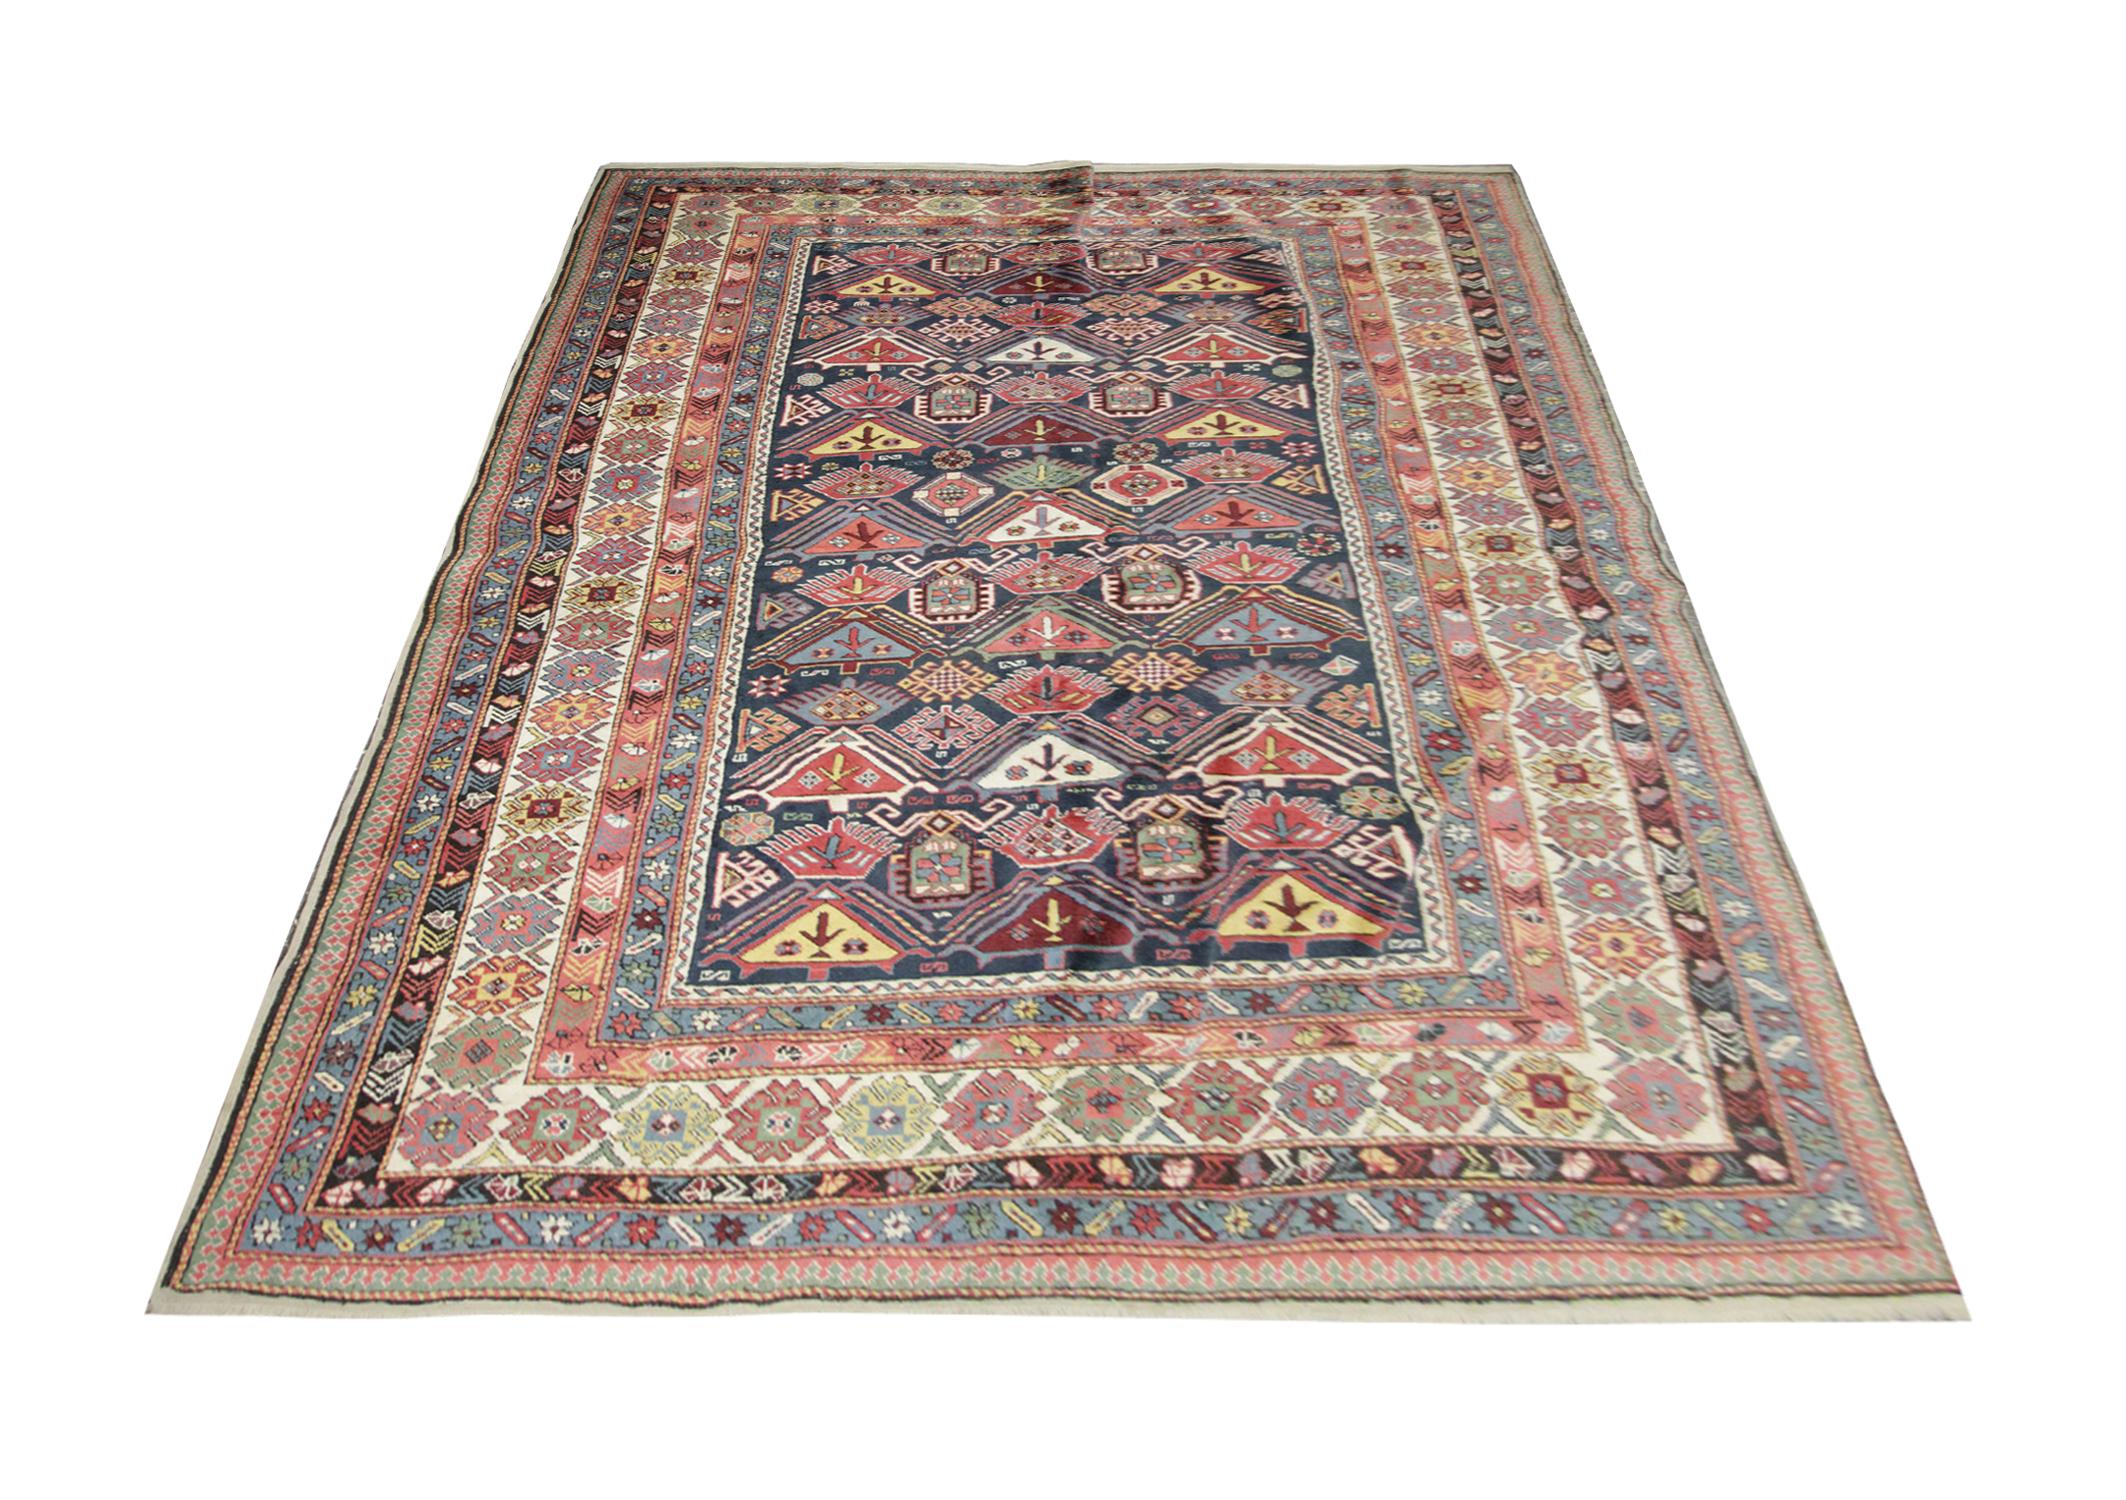 This stunningly detailed area rug has been beautifully handwoven in an abundance of beautiful colourways. A multi-layered border or linear floral and geometric motif patterns in Blue, pink, and yellow, frames the central design. On a background of